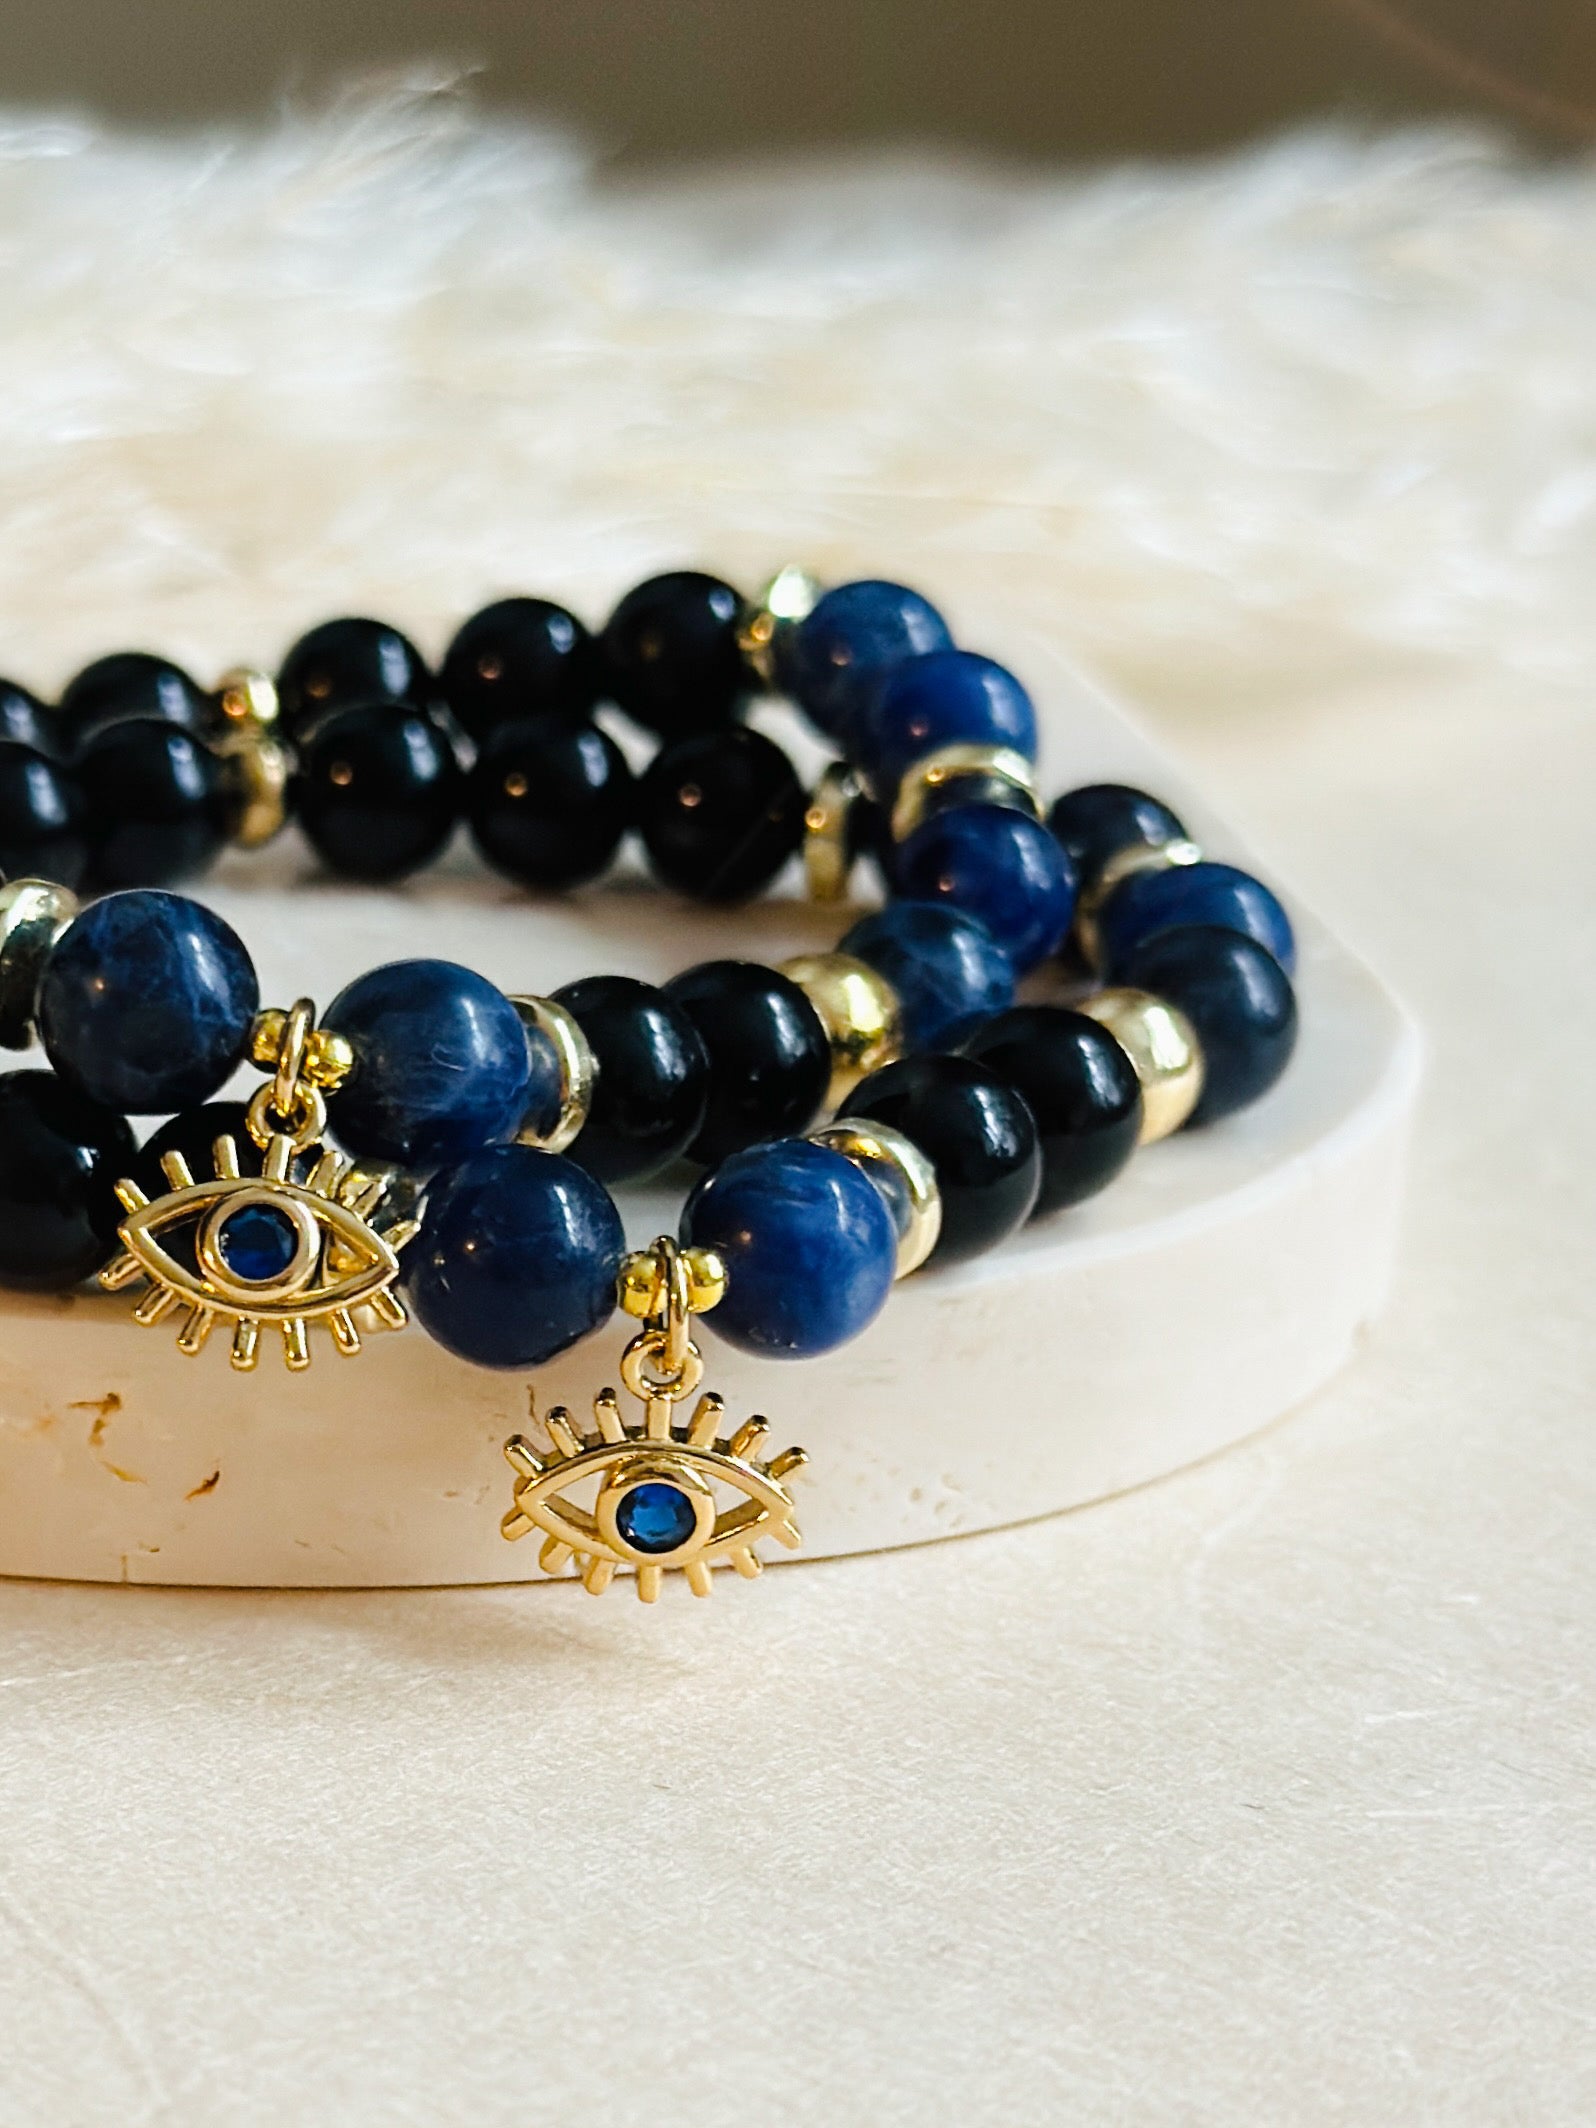 This exquisite gemstone bracelet blends the unique energies of Sodalite and Onyx, accentuated by an intriguing evil eye charm.